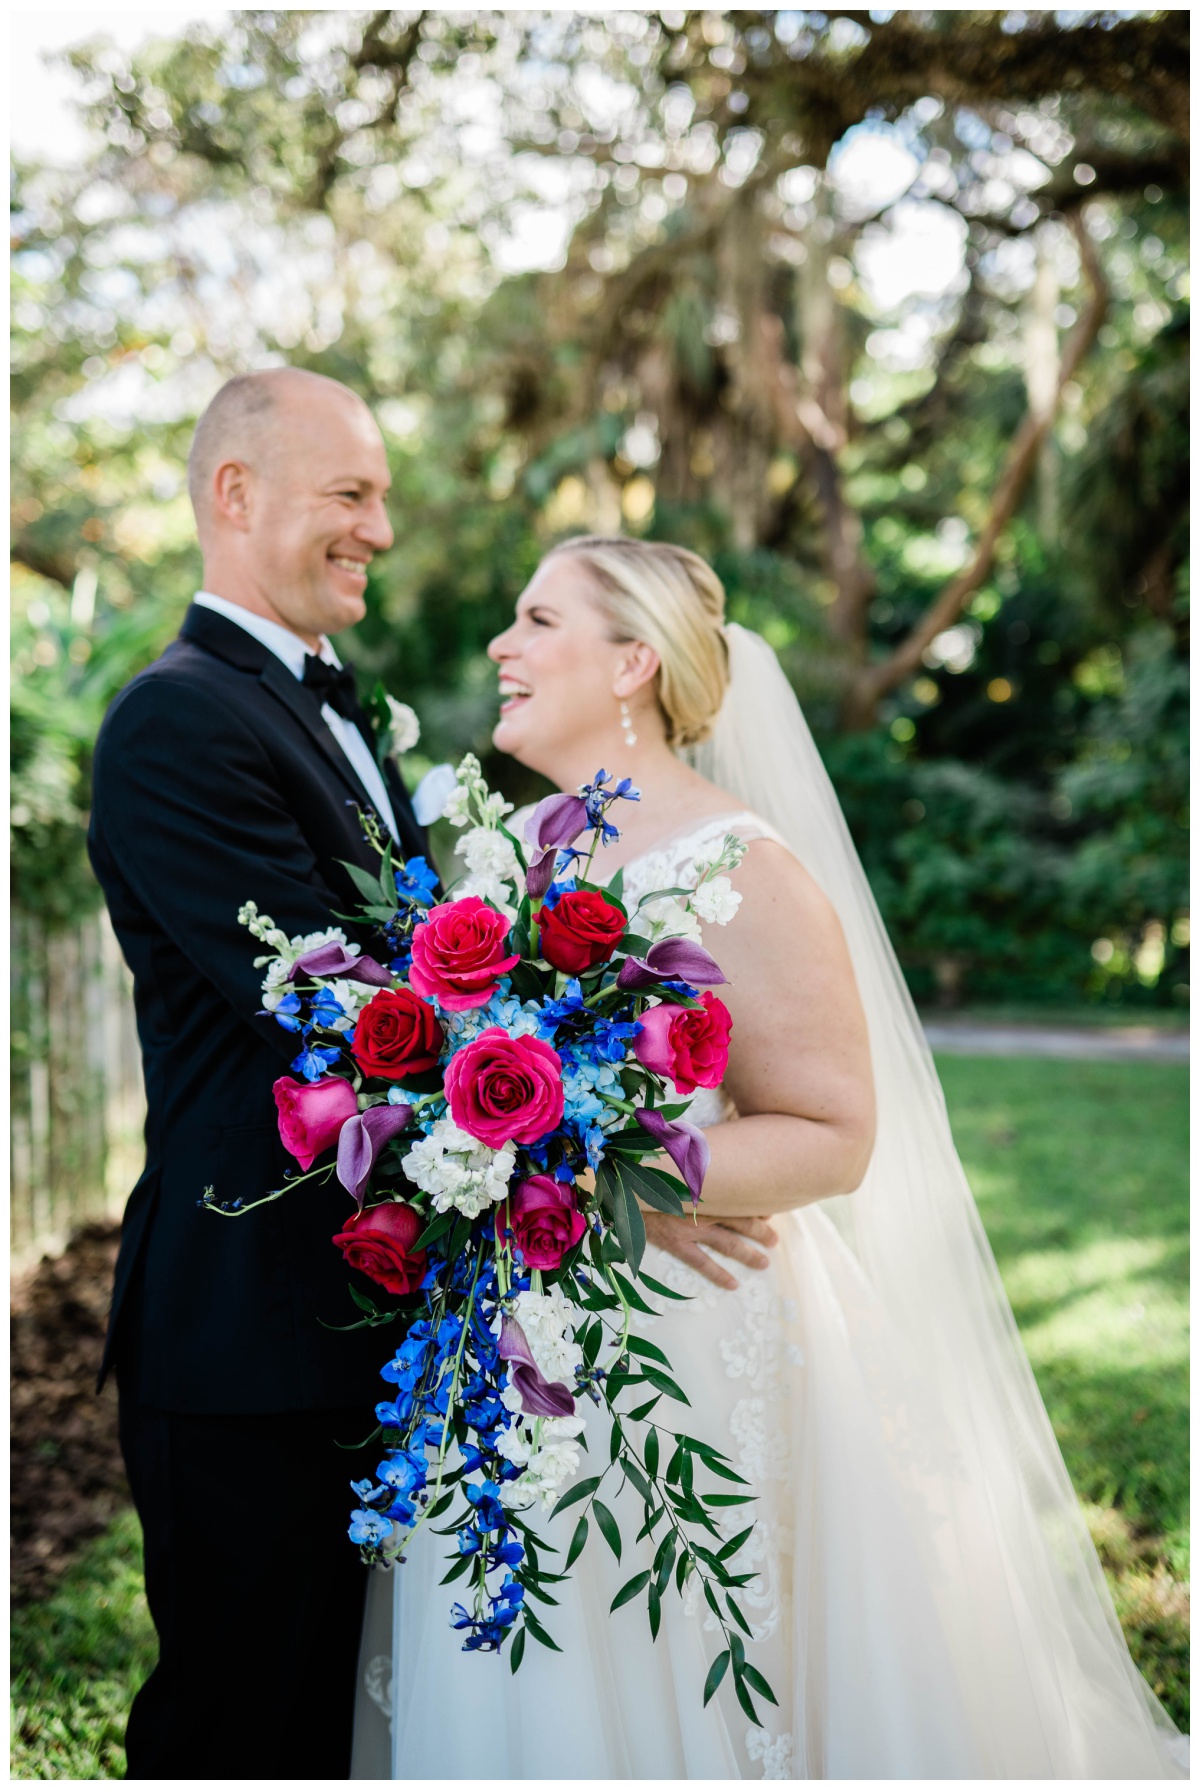 December wedding in Southwest Florida. Bright pops of tropical color in winter bridal bouquet